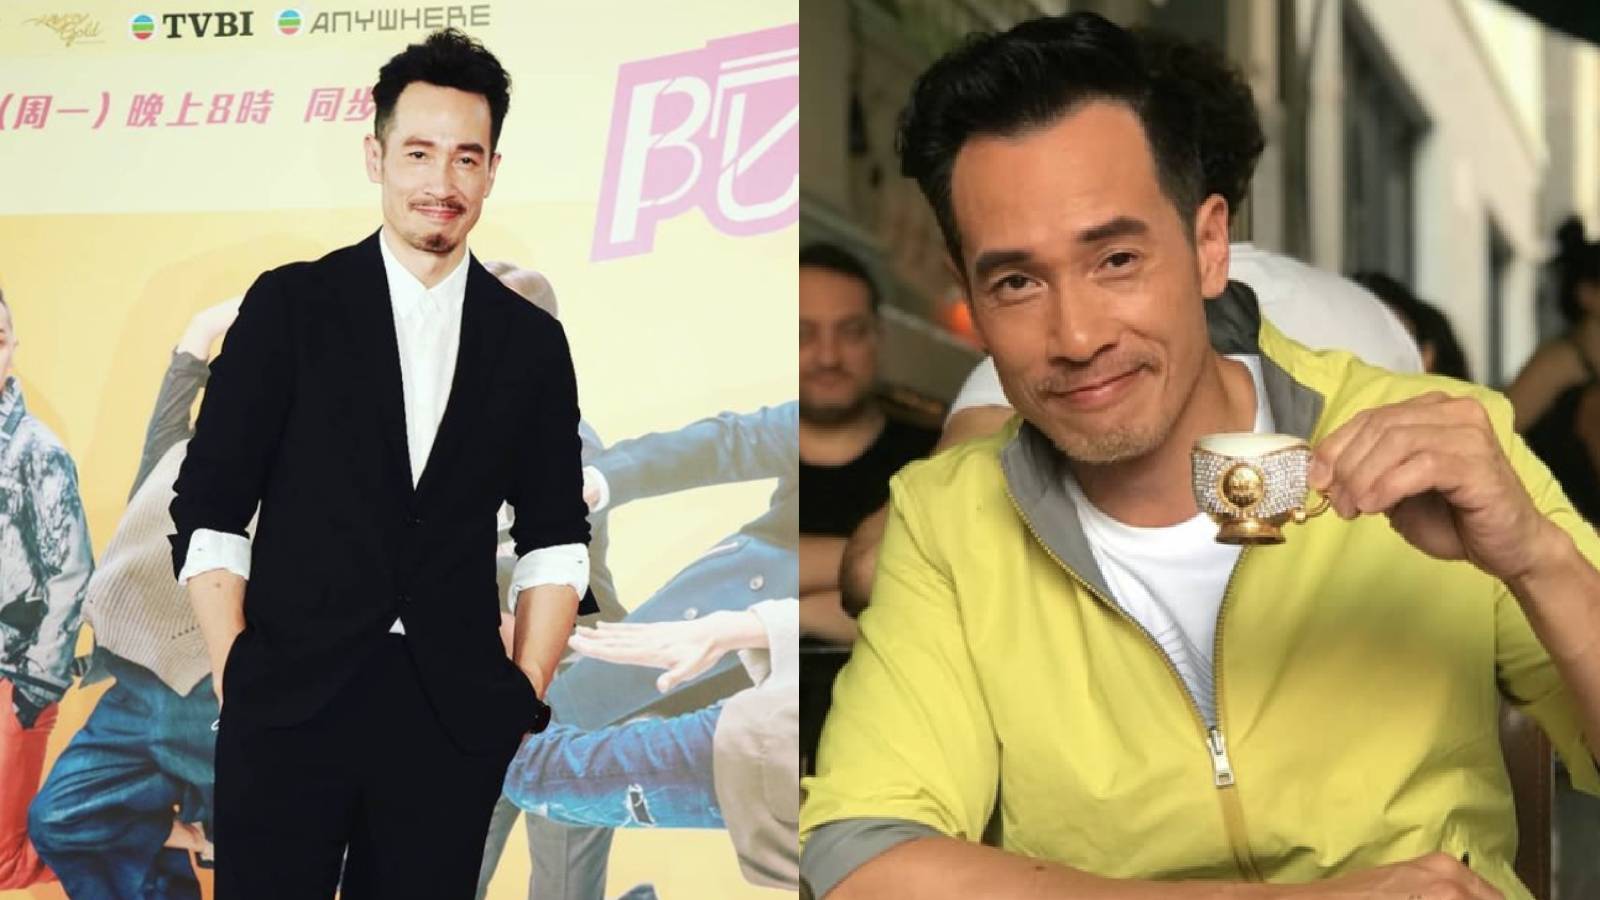 Moses Chan Named TVB's Nicest Star